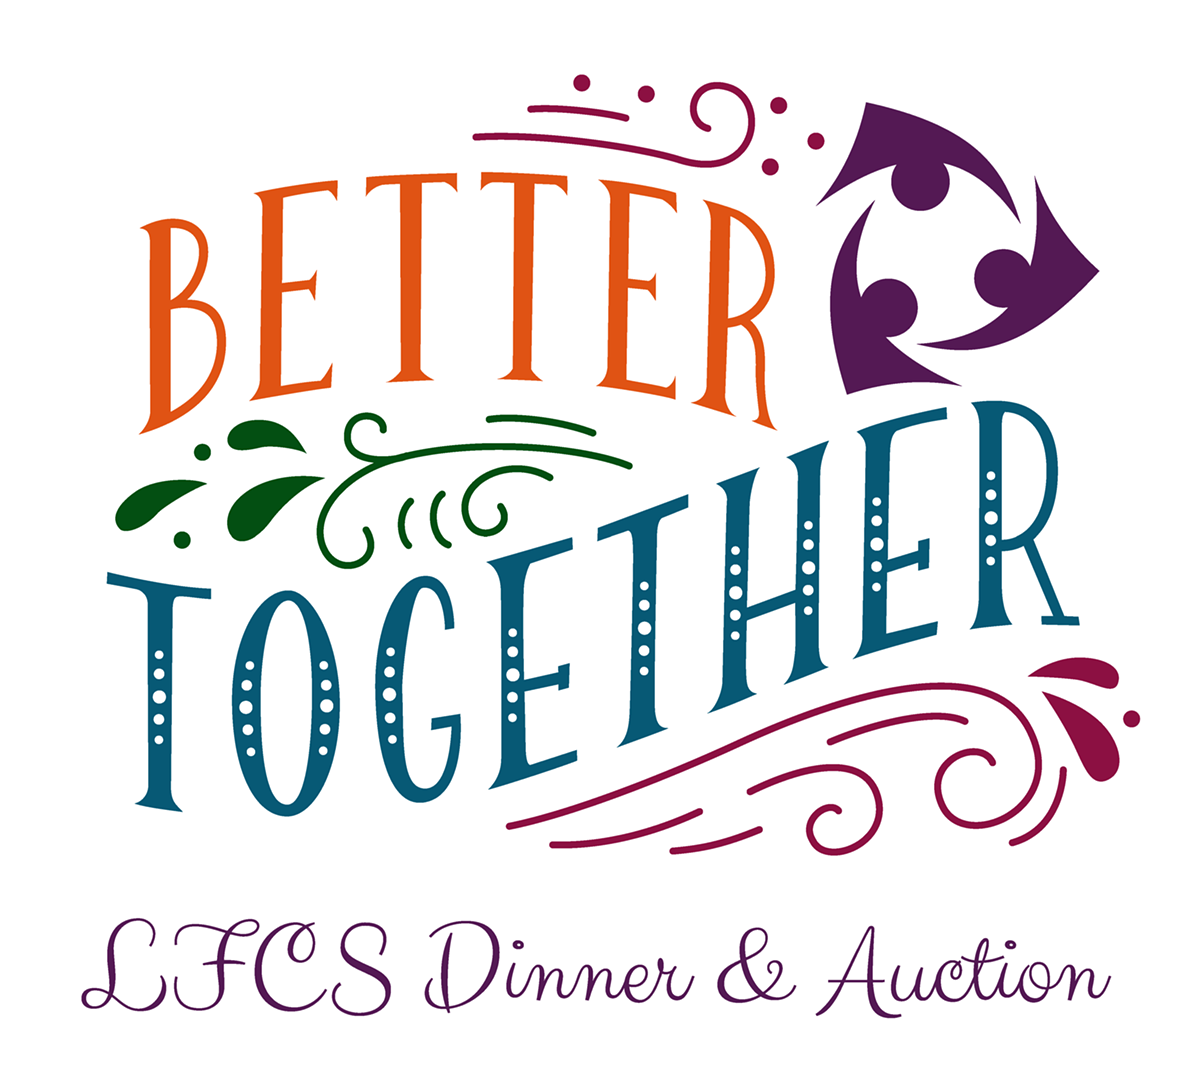 39th Annual LFCS Dinner & Auction